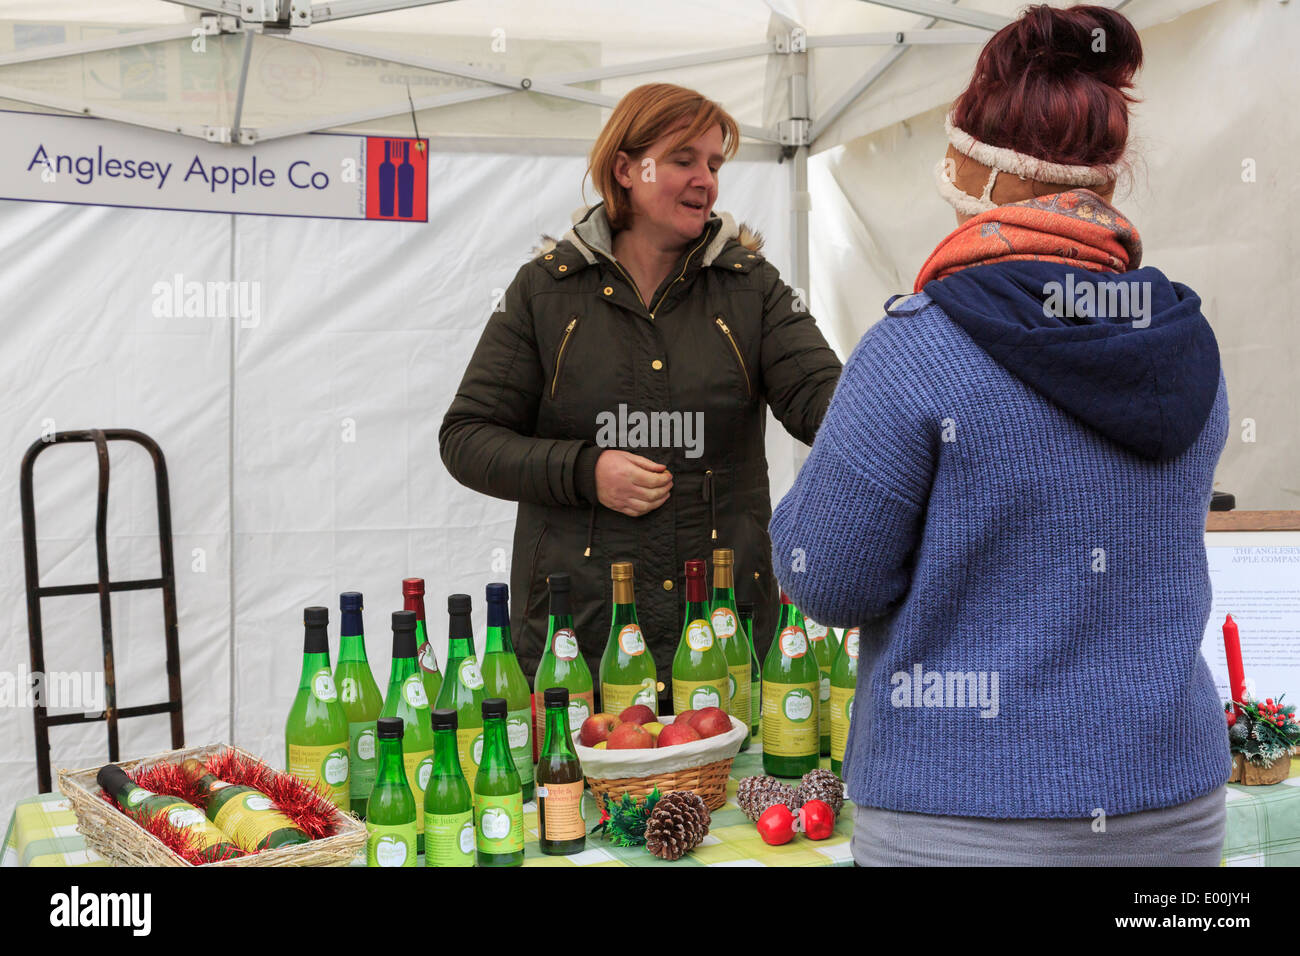 Anglesey Apple Company stall selling fruit drinks at Christmas Food and Craft Fair in Portmeirion Gwynedd Wales UK Britain Stock Photo